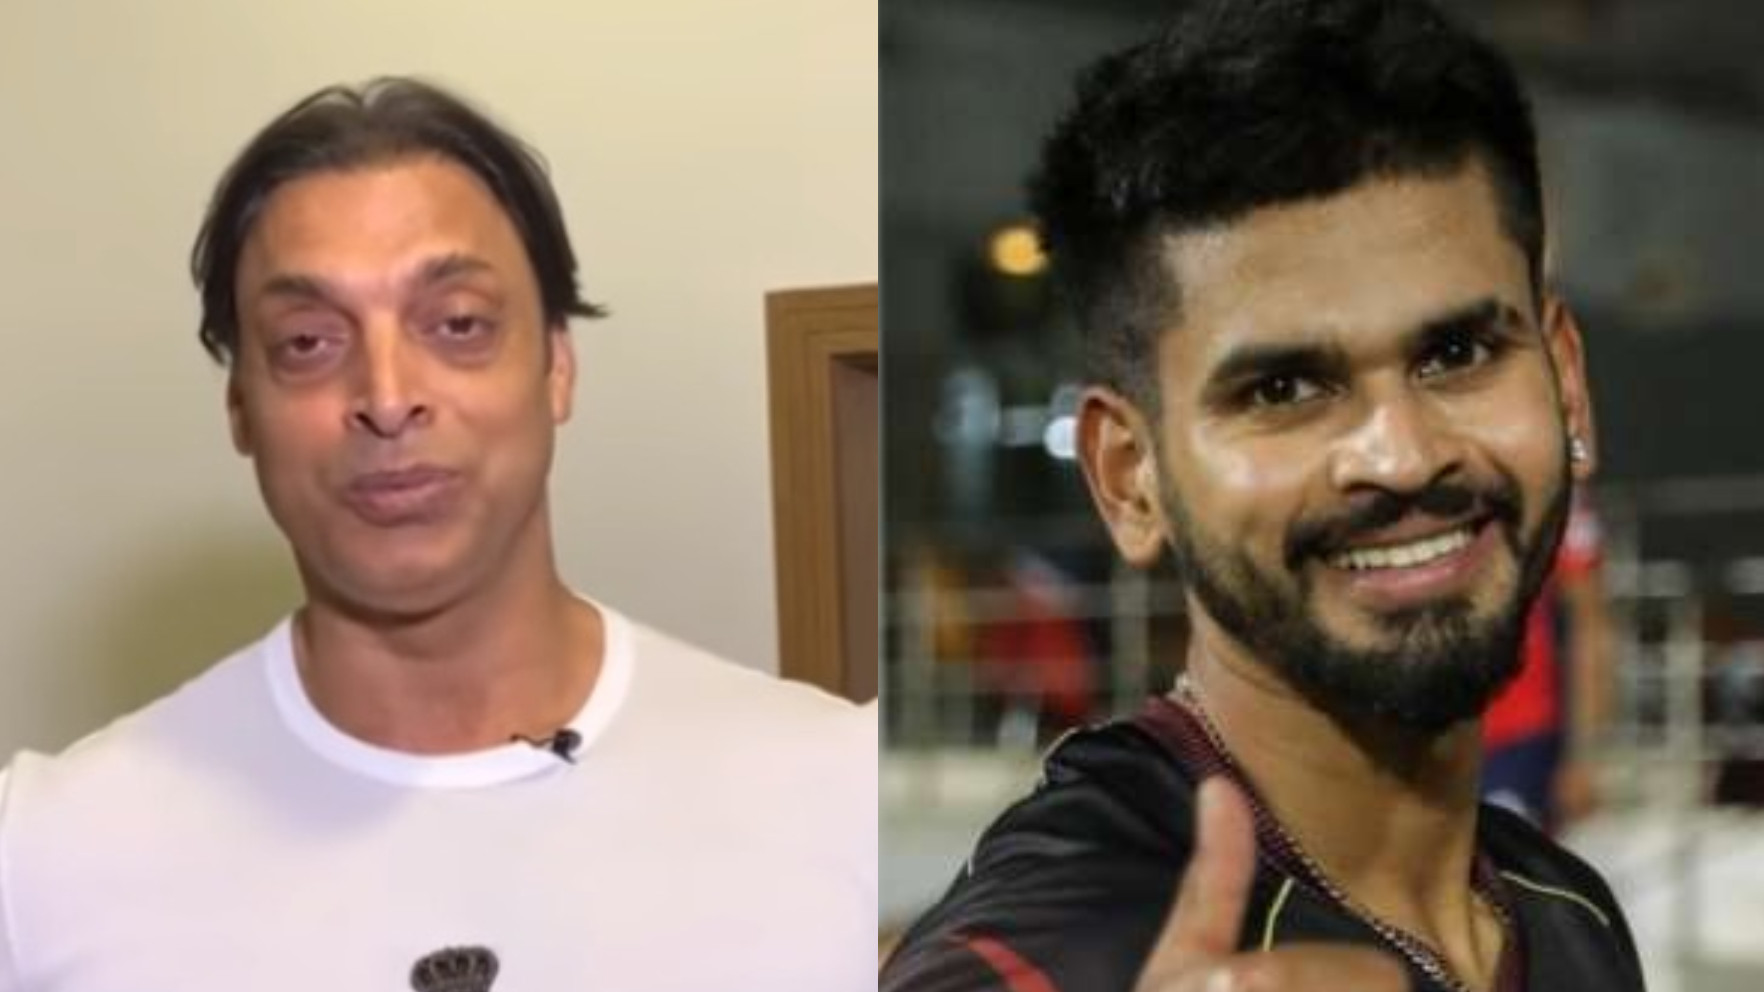 IPL 2022: Shoaib Akhtar says that KKR skipper Shreyas Iyer is making a serious case for India's captaincy